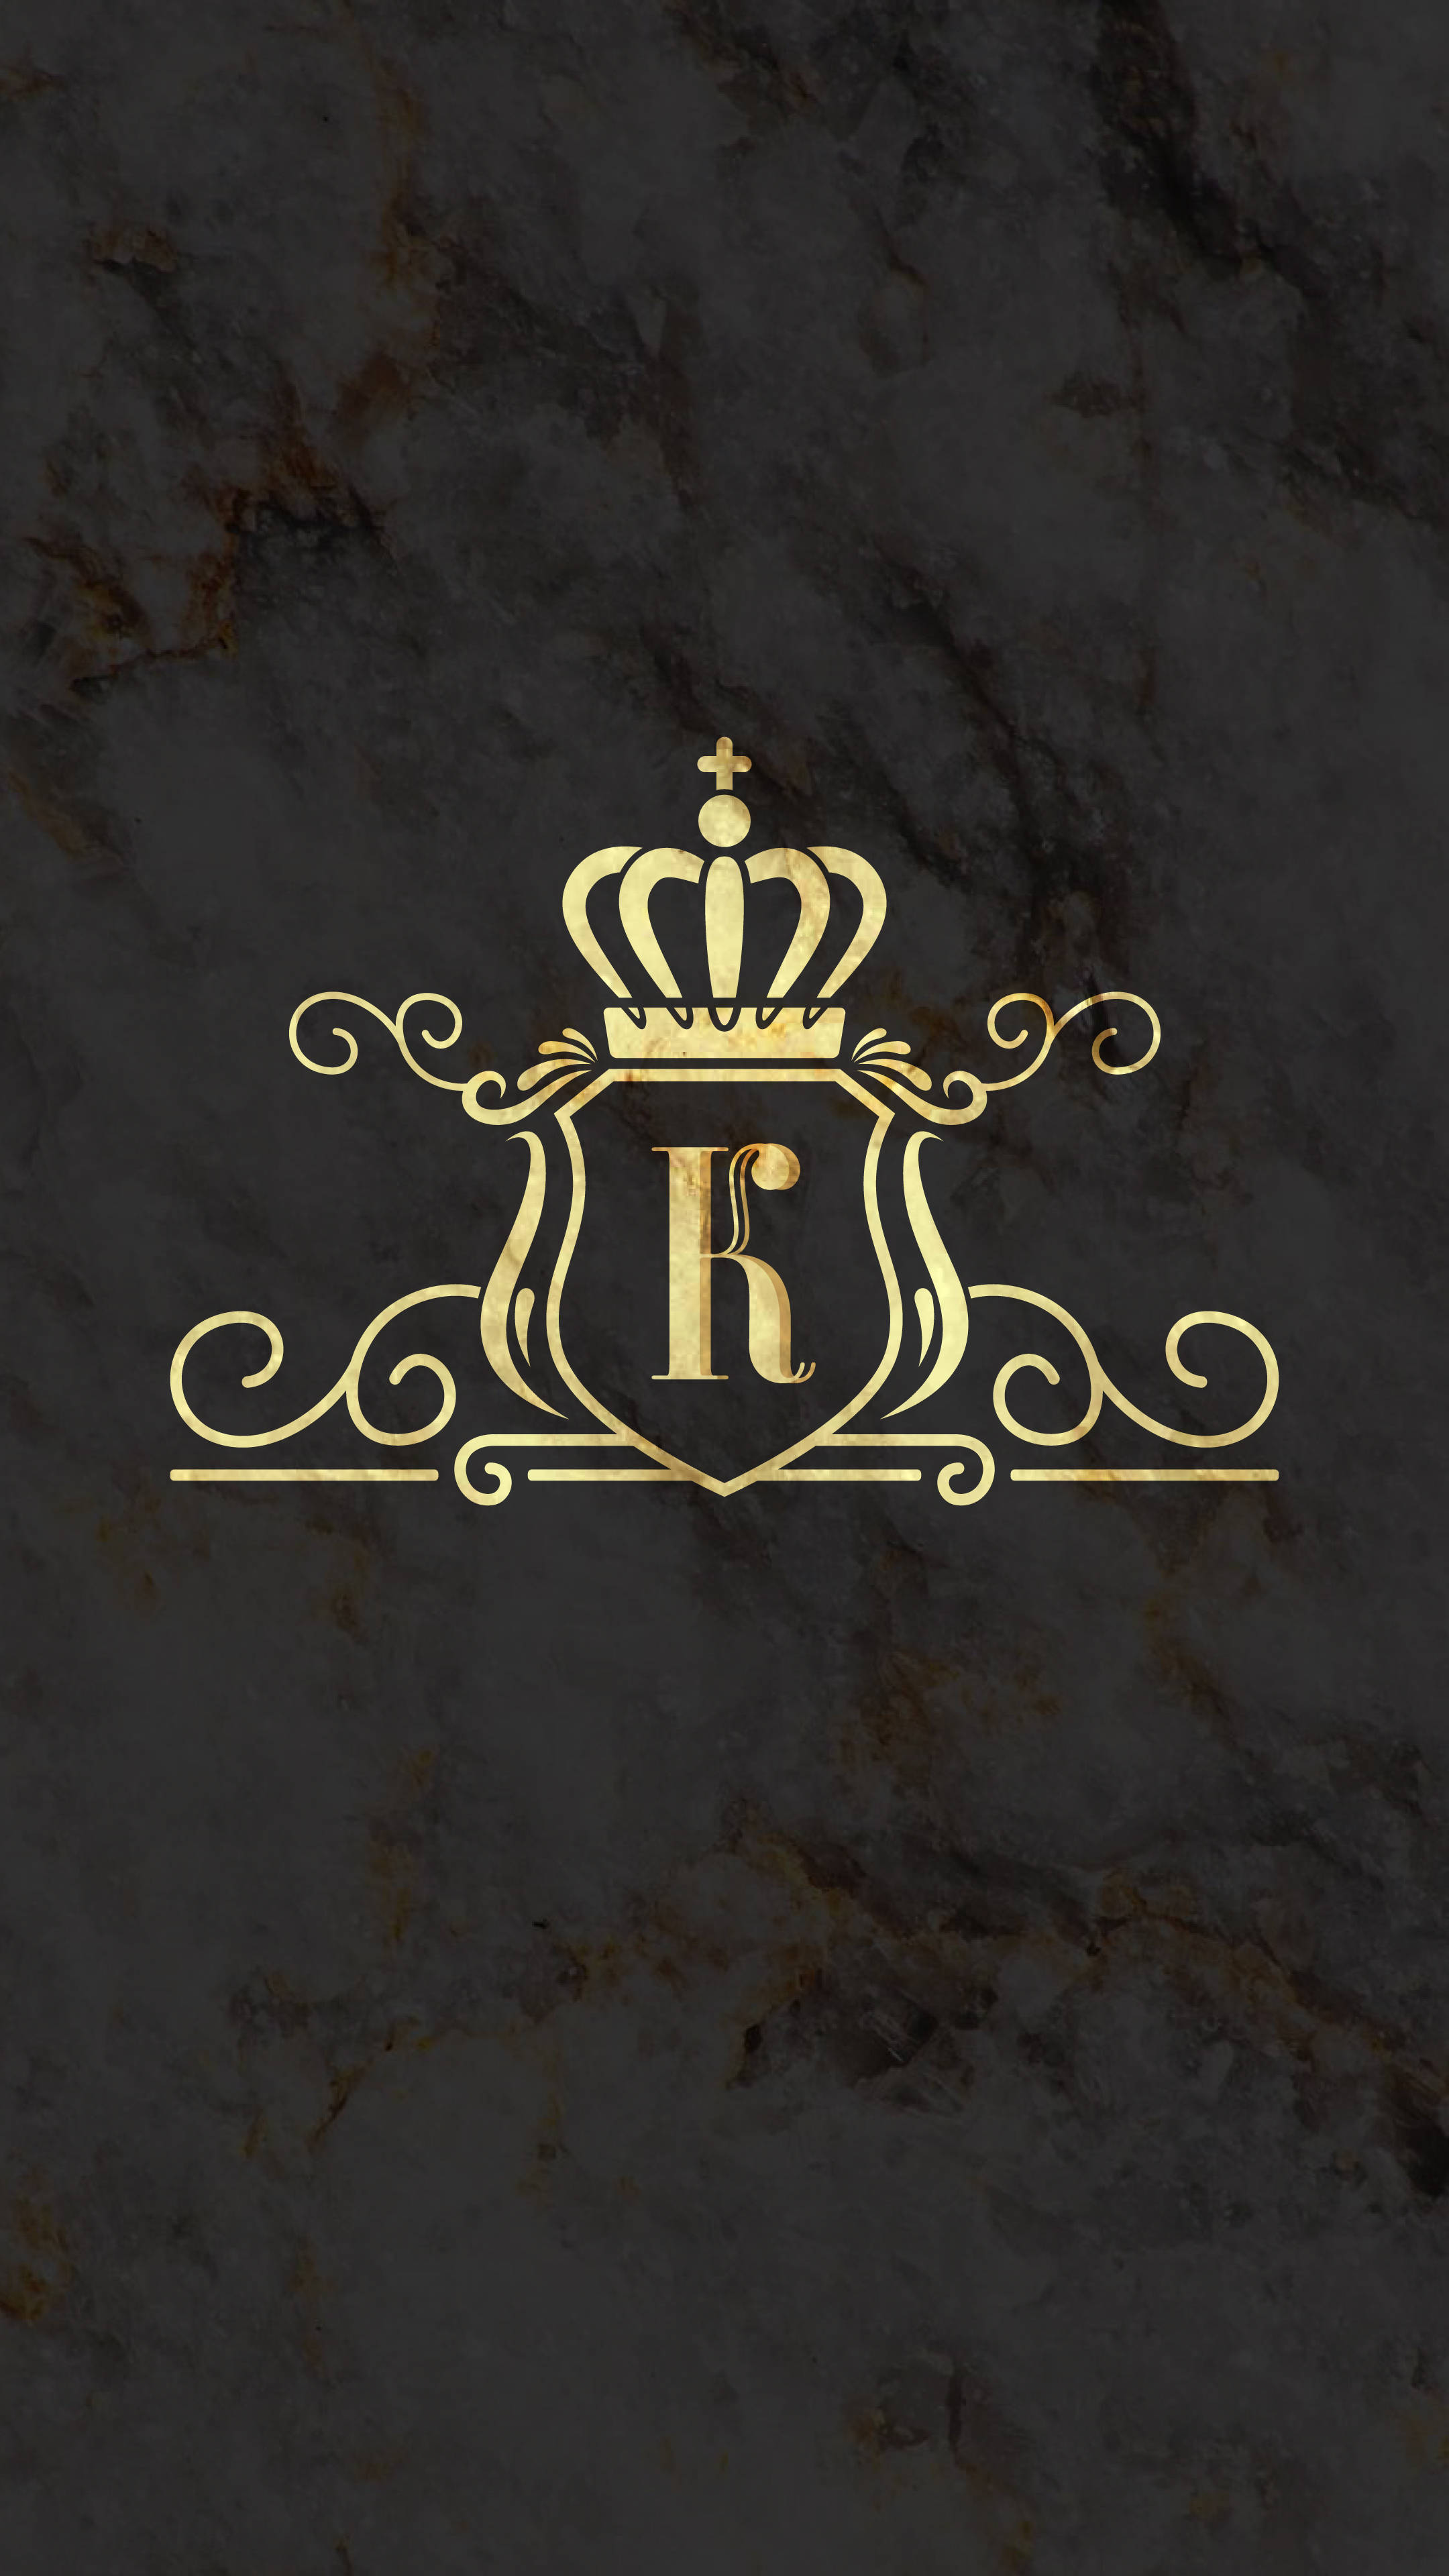 Elegance Of Royalty: The Golden Marble King And Queen Wallpaper